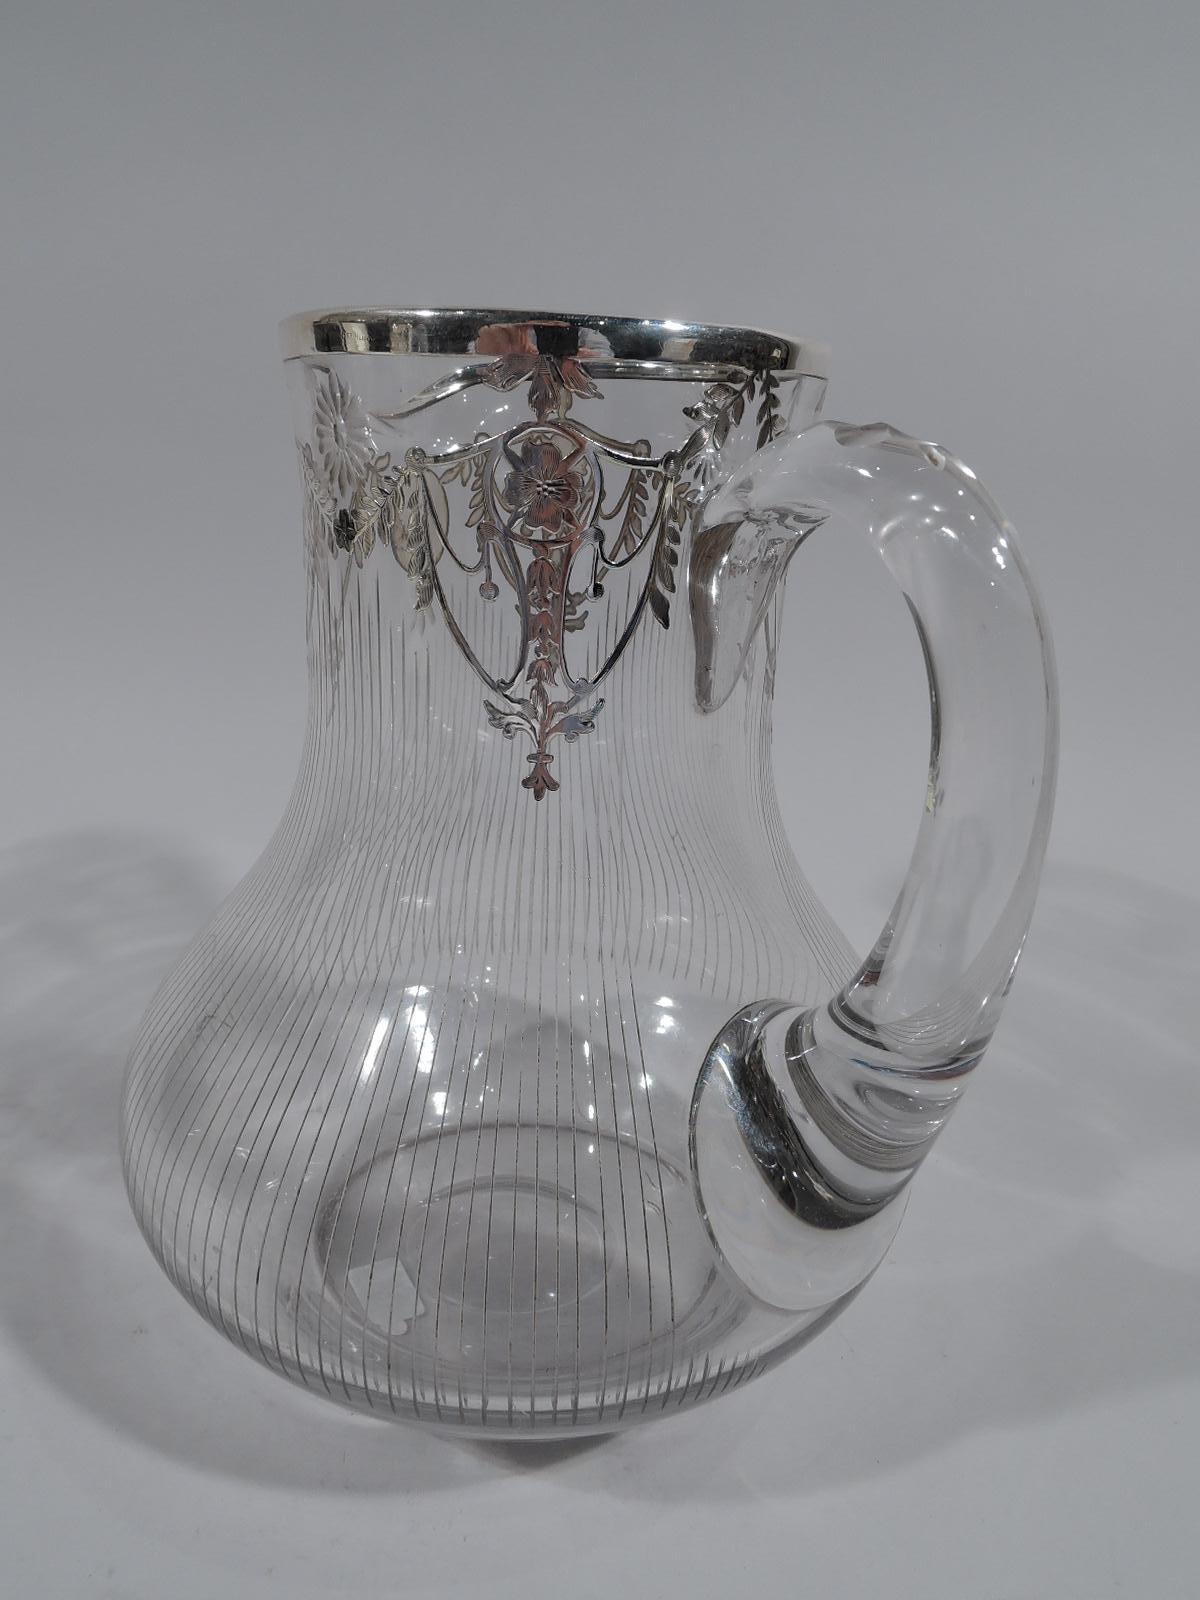 Edwardian Regency glass water pitcher with silver overlay, circa 1910. Bellied baluster with small lip spout and C-scroll handle. At mouth silver overlay garland with pendant flowers and cut paterae. Oval frame with interlaced script monogram. Body